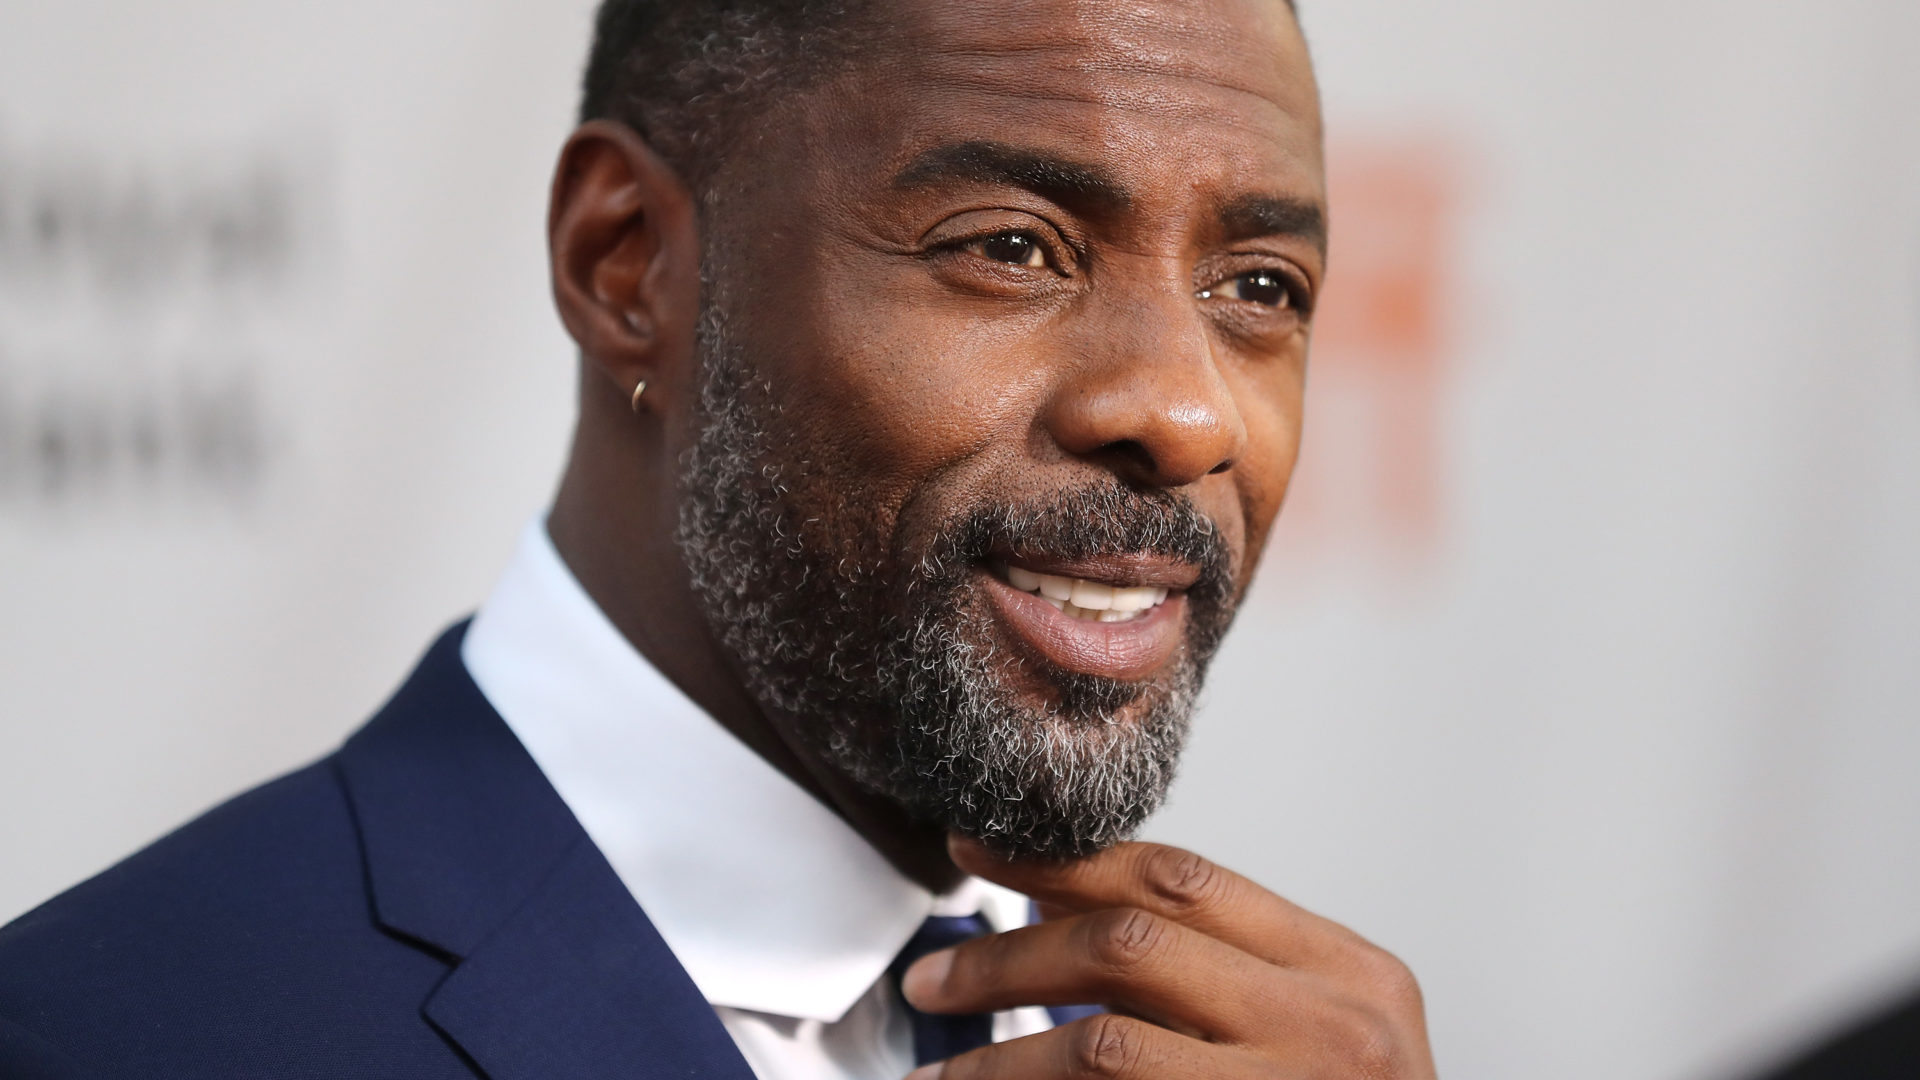 IDRIS ELBA TO STAR IN “THE HARDER THEY FALL” FOR NETFLIX